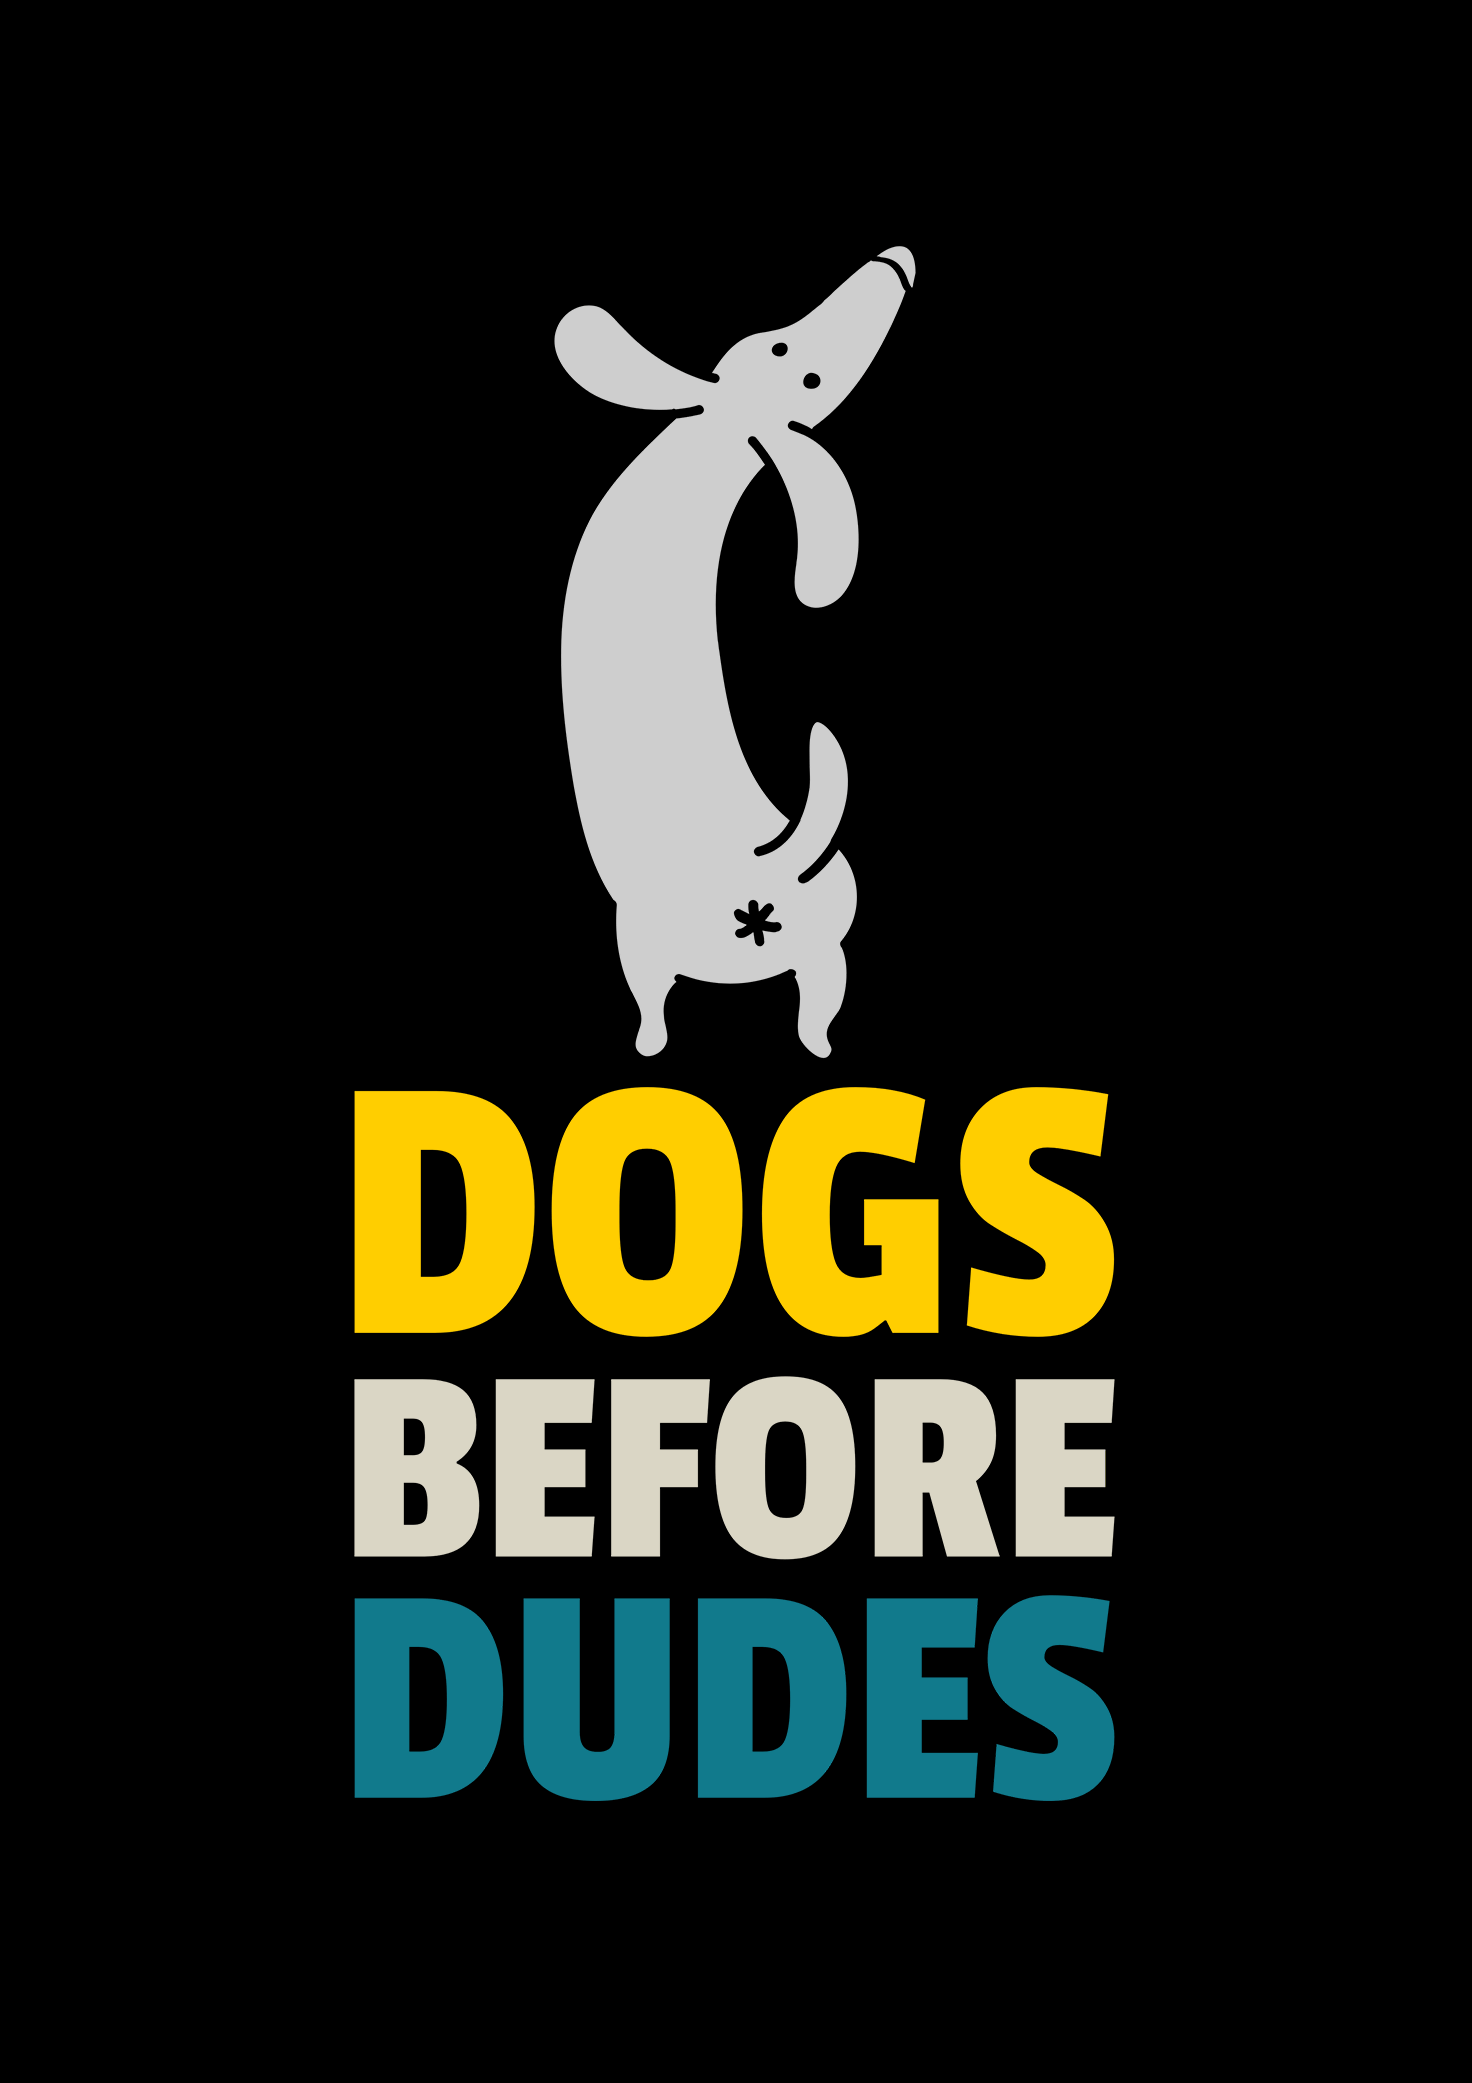 "DOGS BEFORE DUDES " - HALF-SLEEVE T-SHIRTS